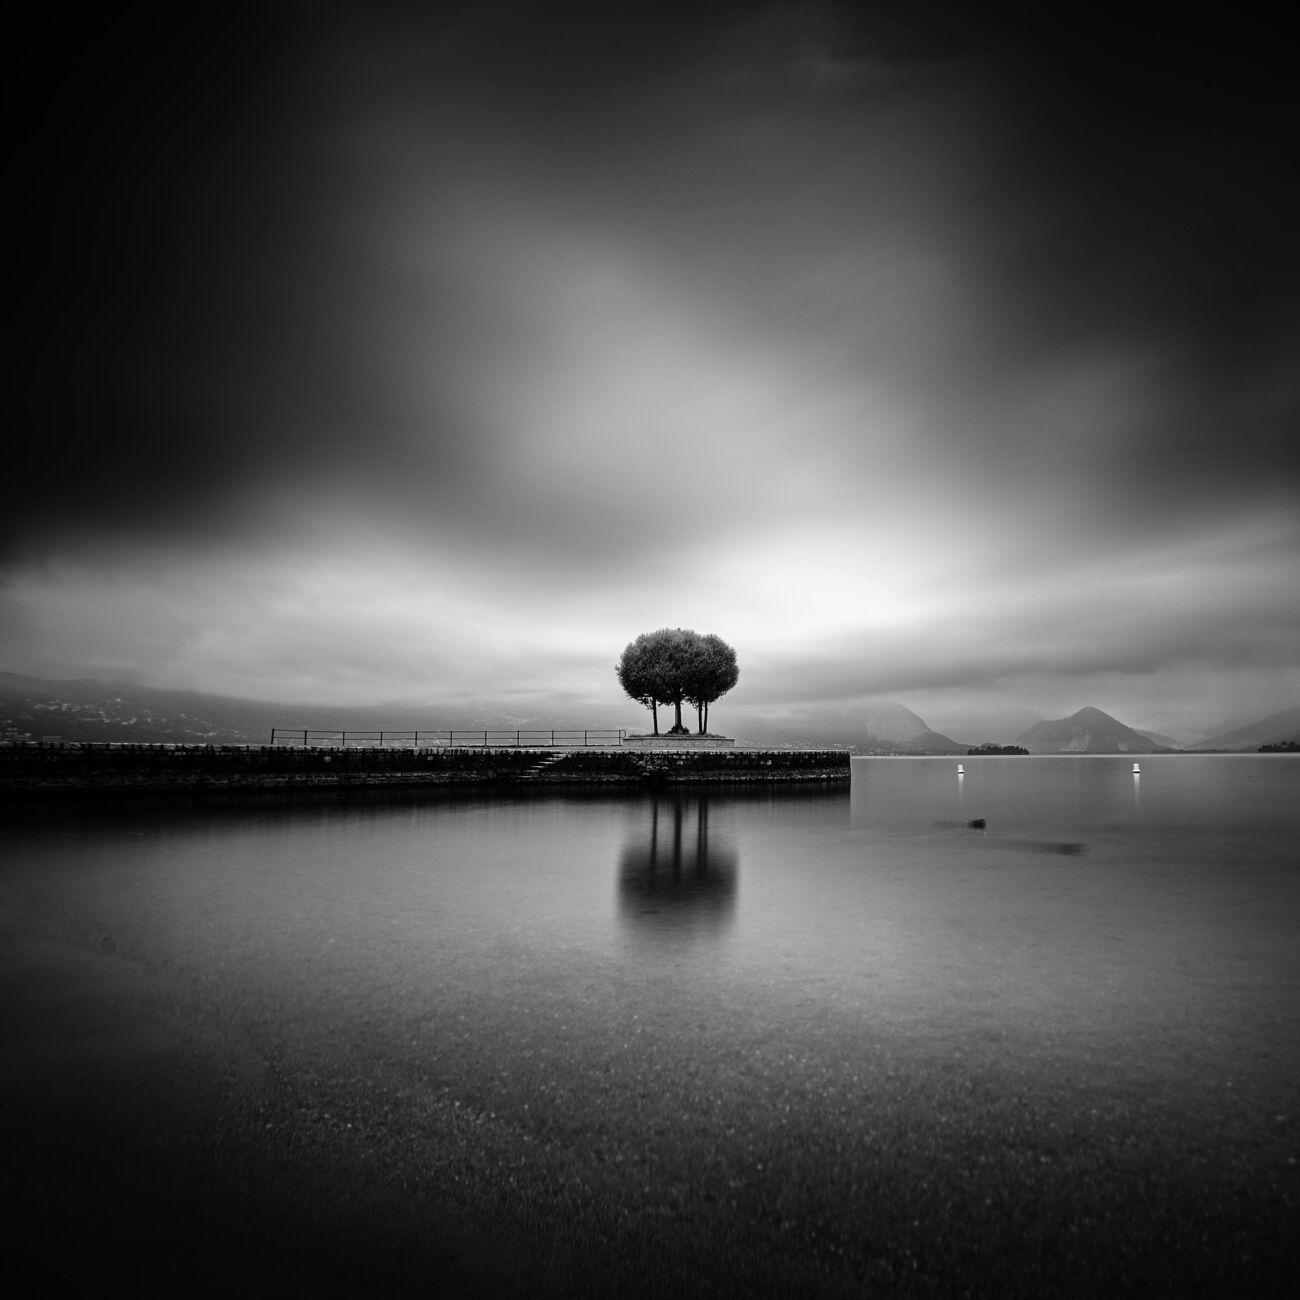 Trees On Pier, Etude 1, Lake Maggiore, Italy. August 2014. Ref-11451 - Denis Olivier Art Photography